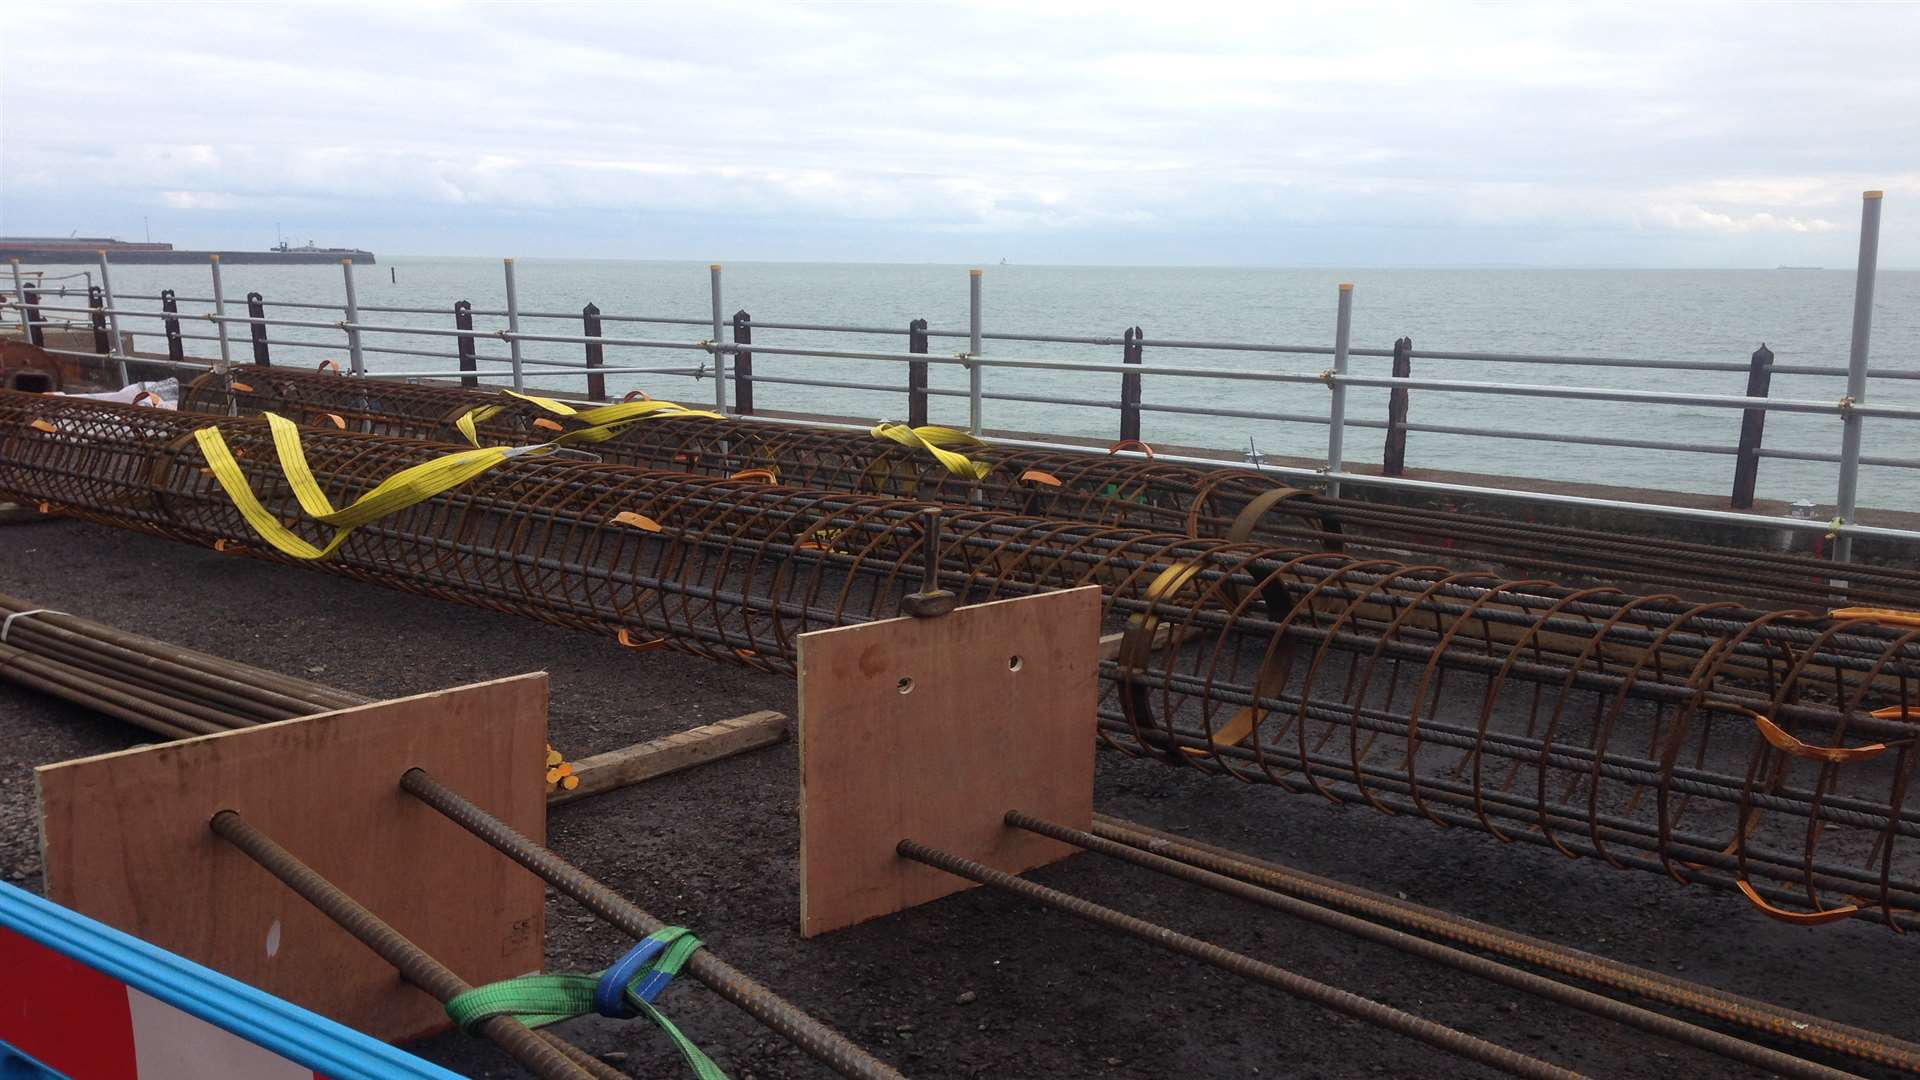 Railway is being repaired between Dover and Folkestone after sea wall damage